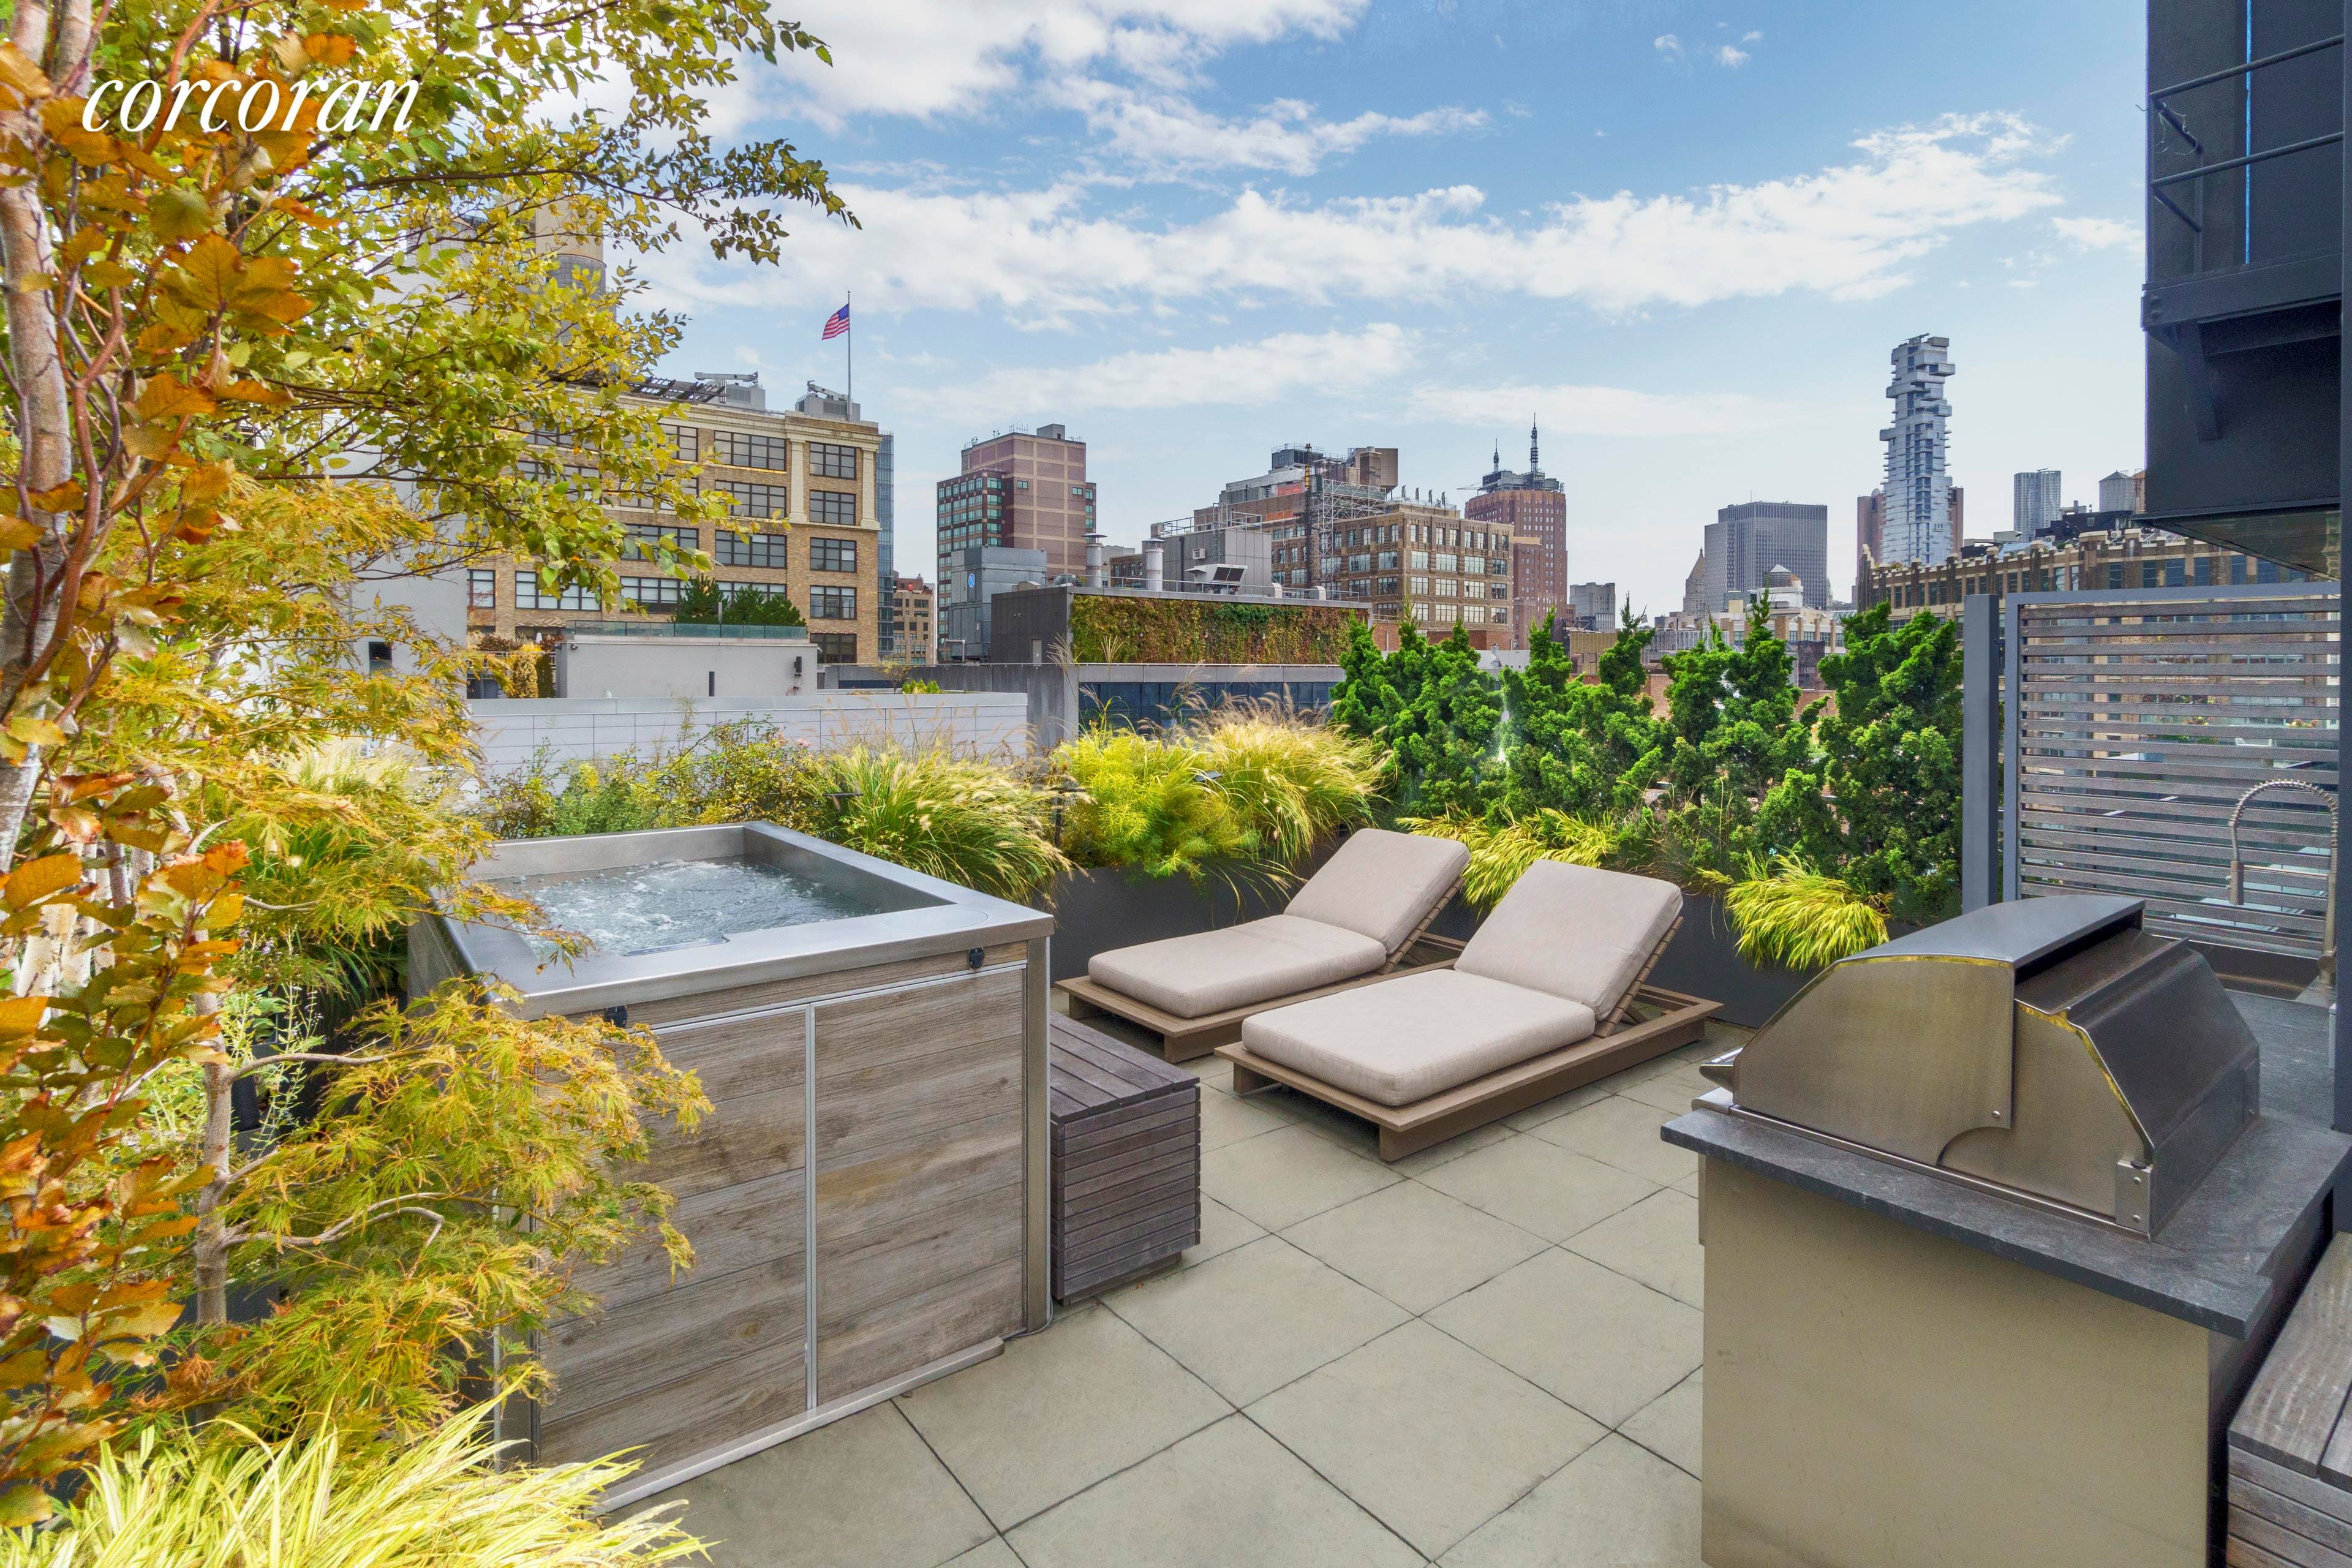 A terrace lover's dream, this incredible duplex penthouse spans 2, 859 square feet of interior space with three sensational terraces totaling 1, 344 square feet including a rooftop terrace with ...